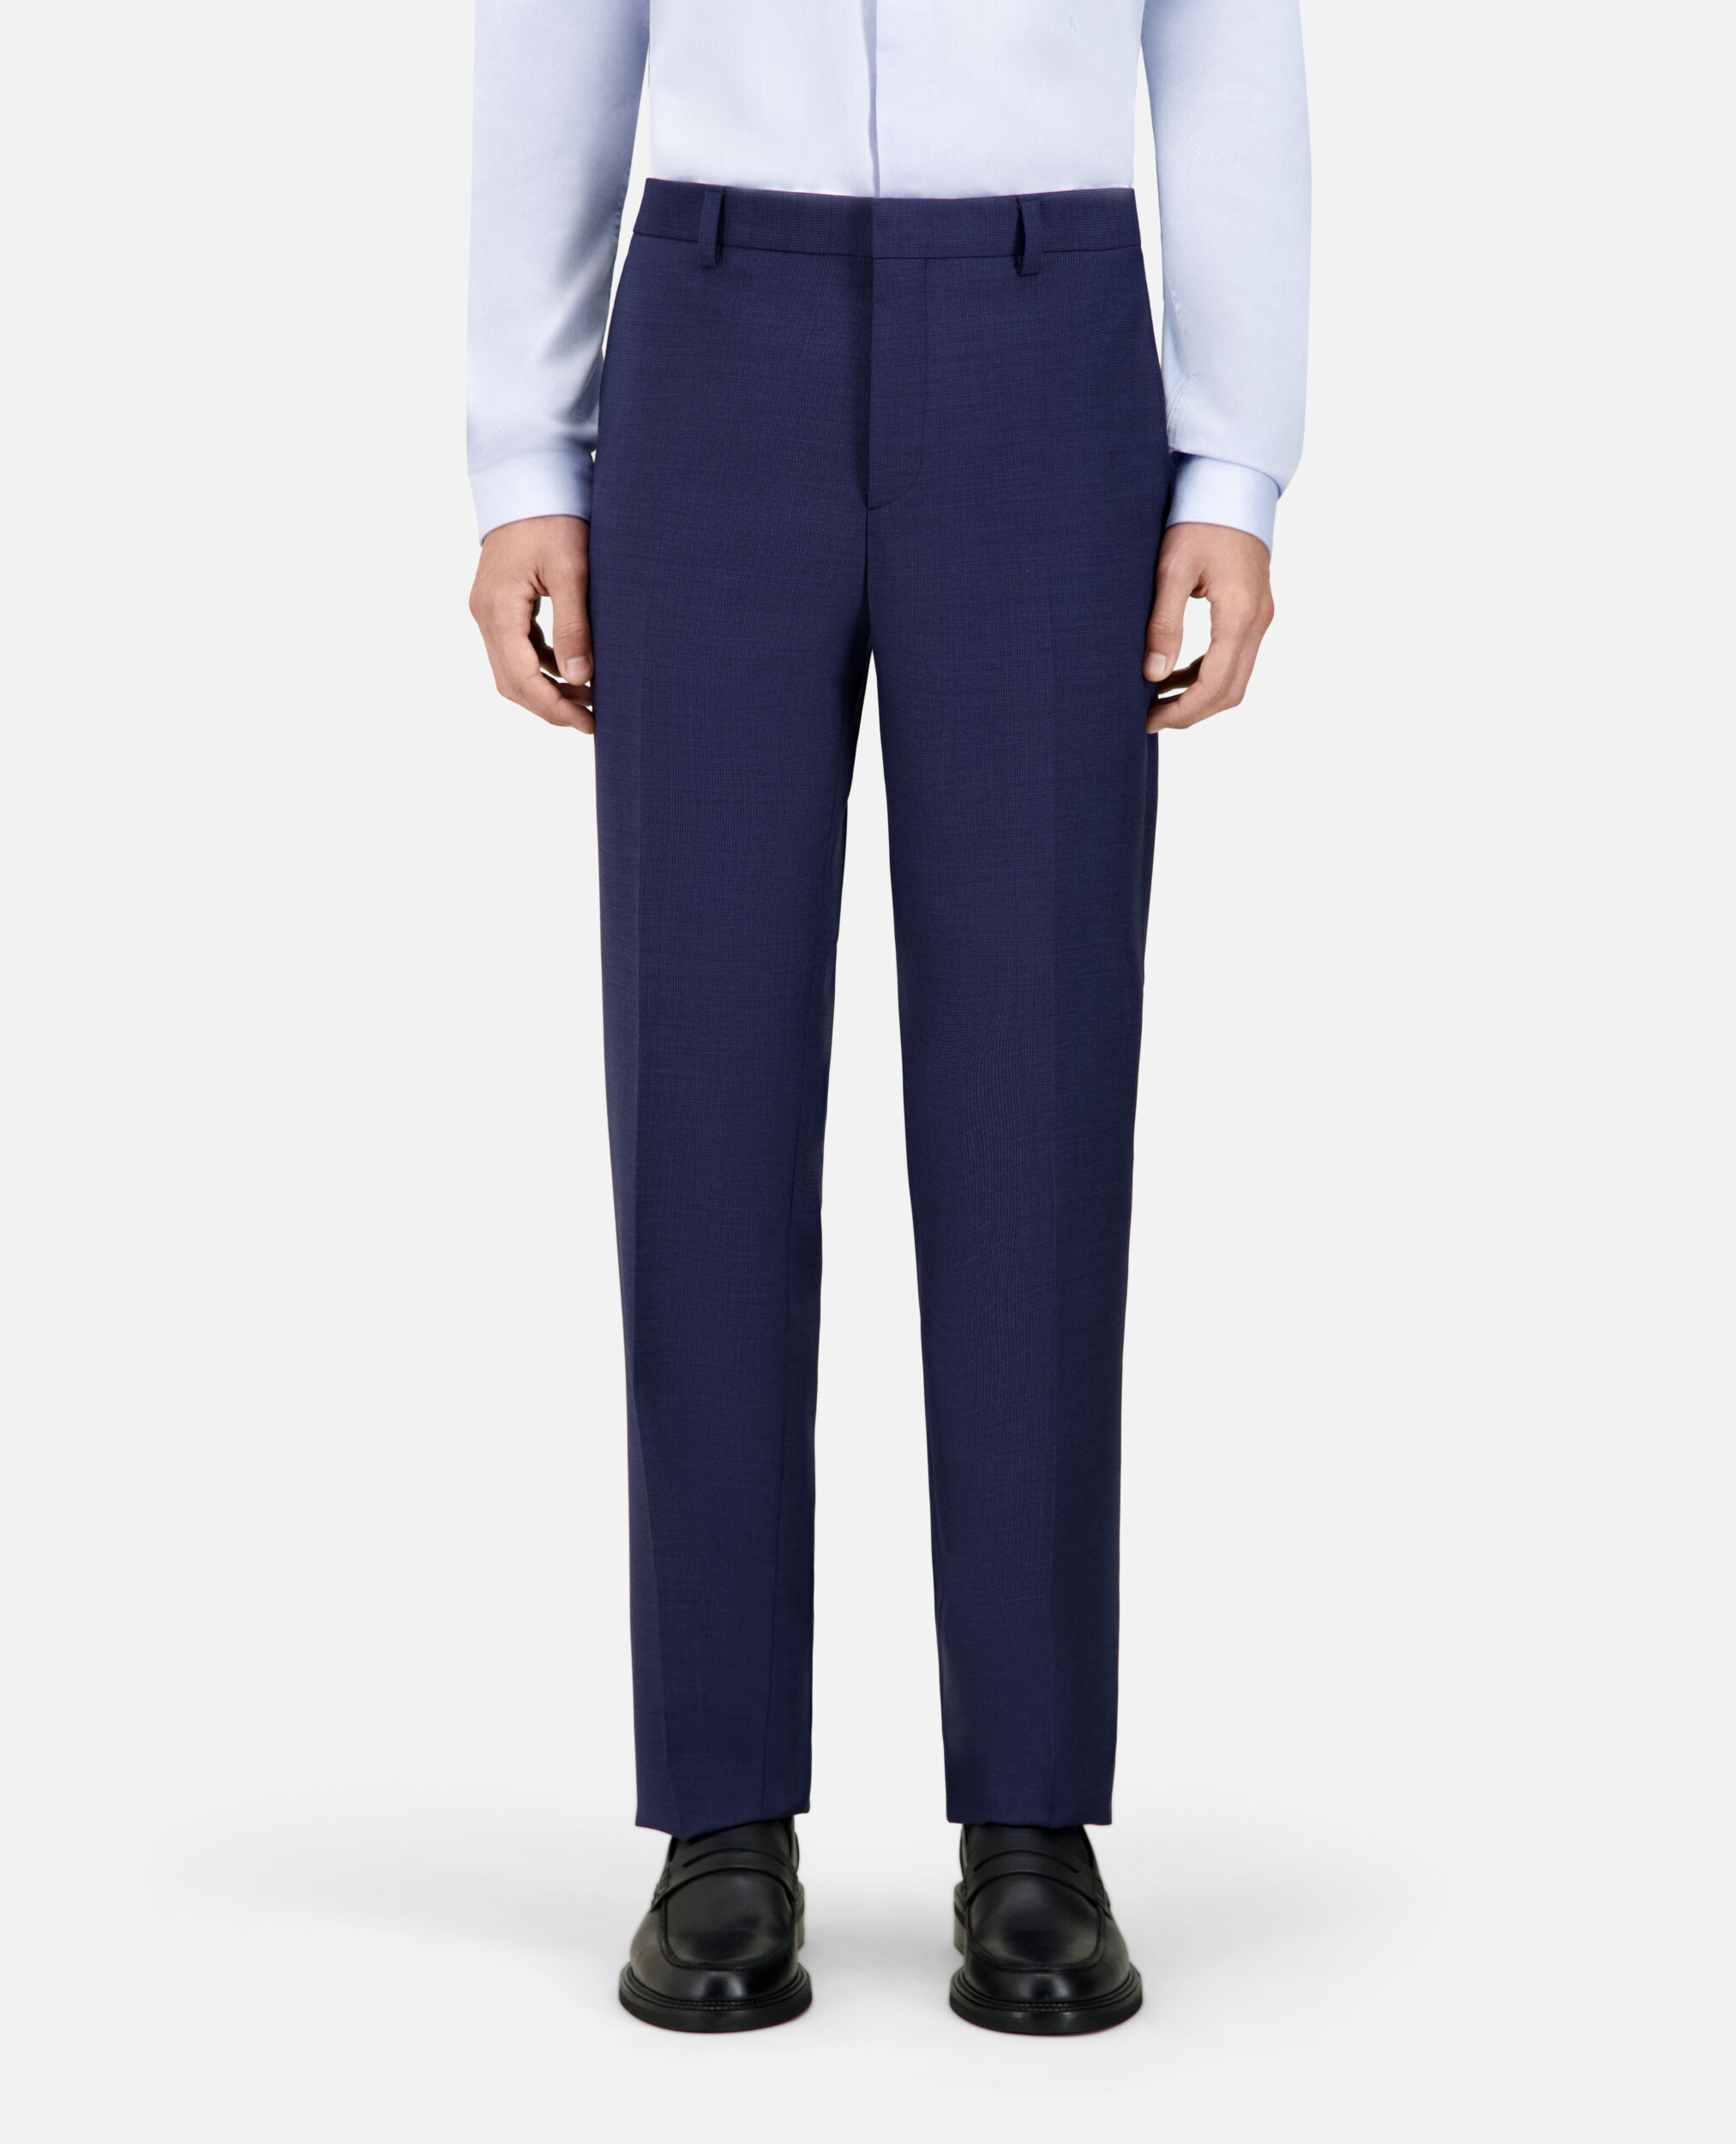 Navy blue micro-check wool suit trousers, NAVY, hi-res image number null